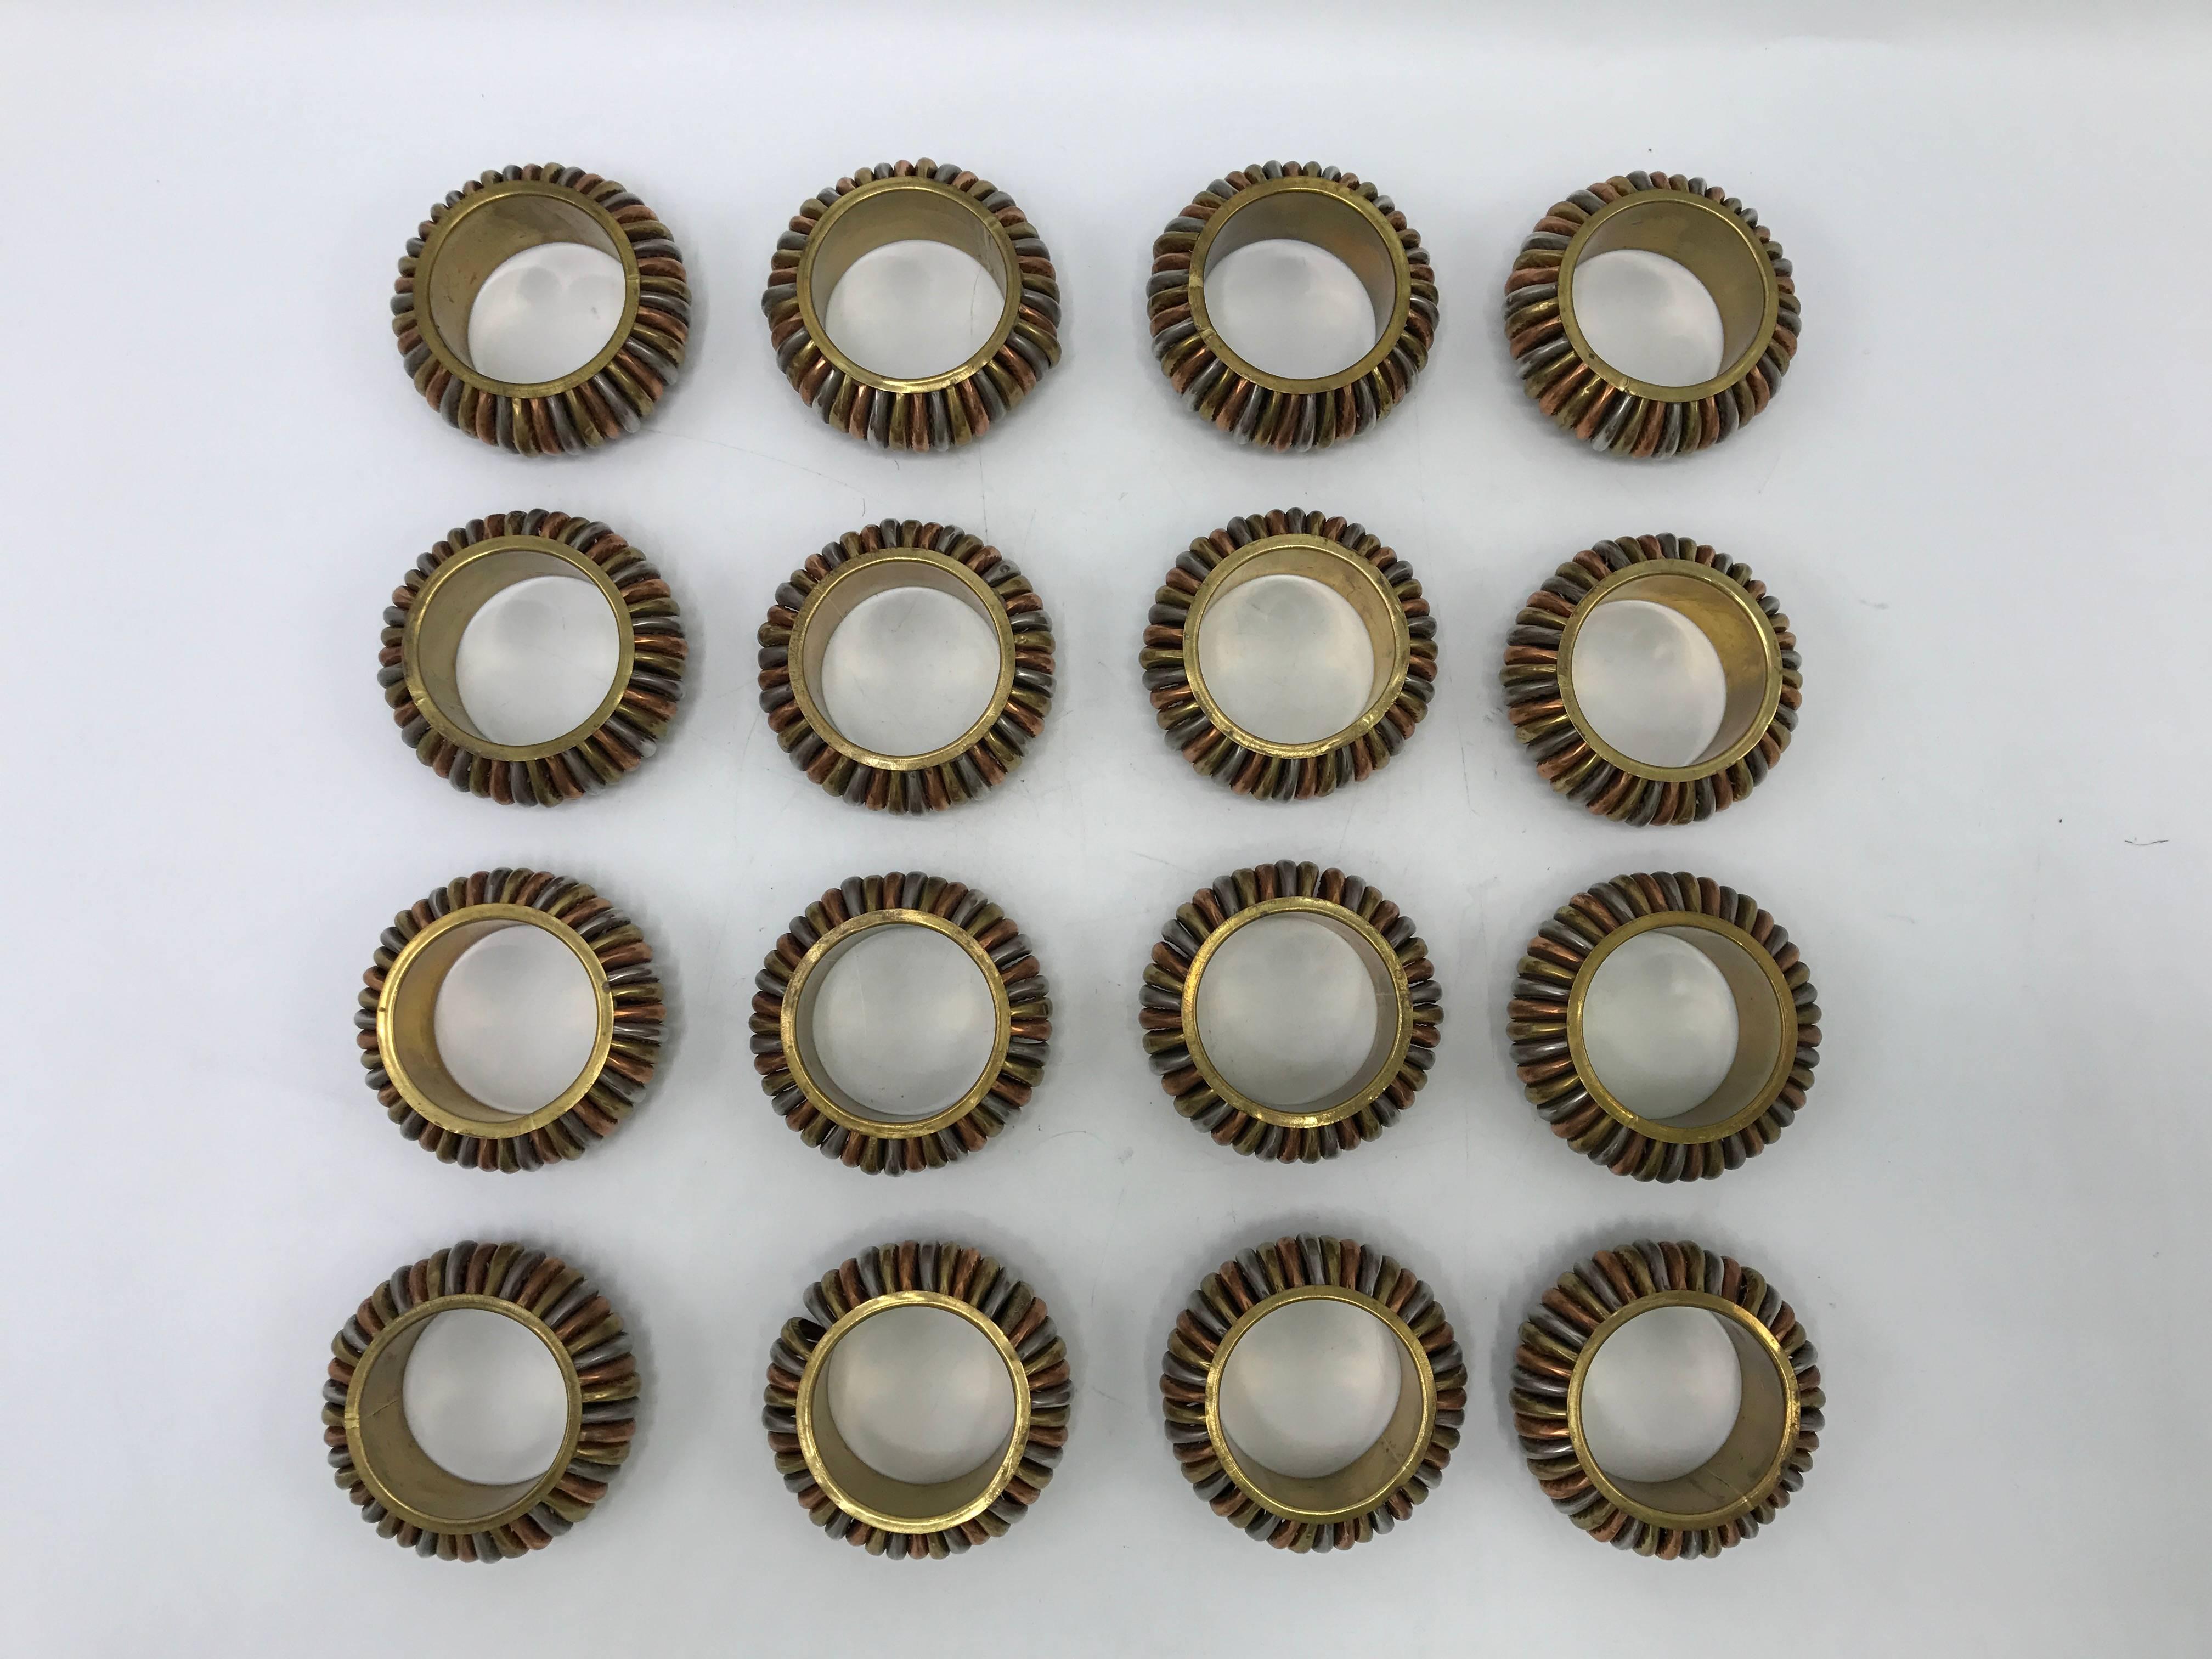 Offered is a gorgeous, set of 16, 1970s brass, copper and steel/silver napkin rings. Modern, sophisticated and handsome look for any table setting.